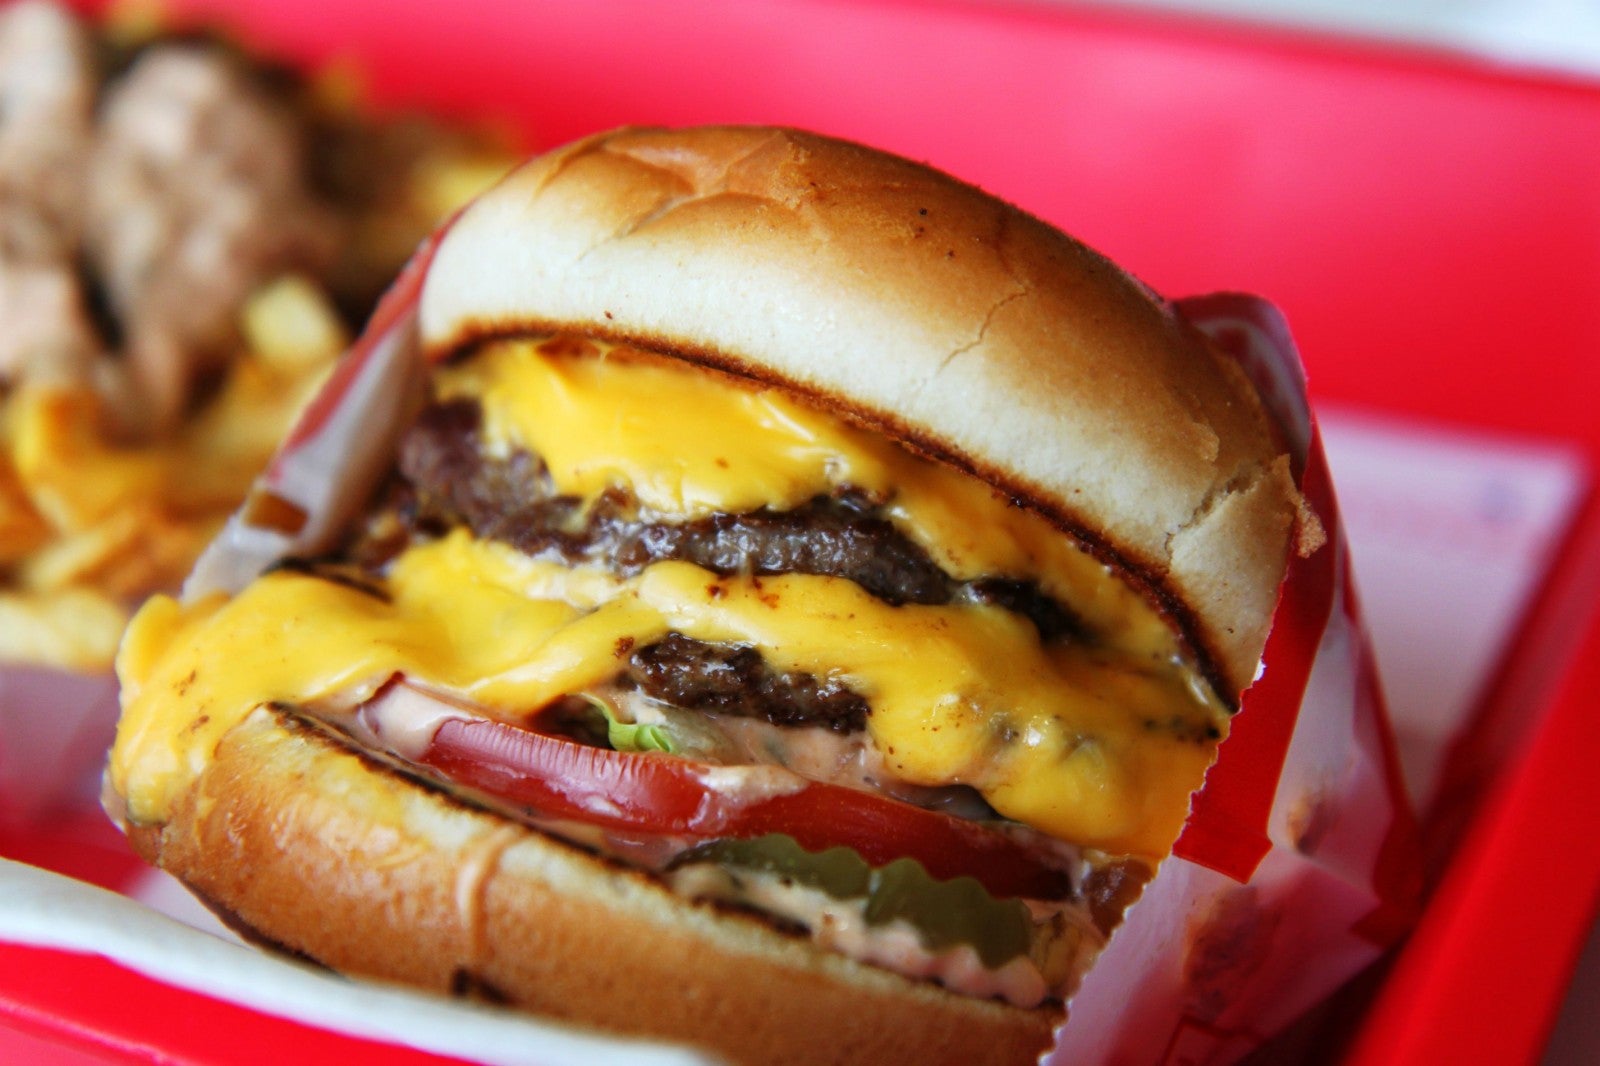 There's Going to Be An In-N-Out Burger Pop Up Stall in PJ Tomorrow! - WORLD OF BUZZ 5